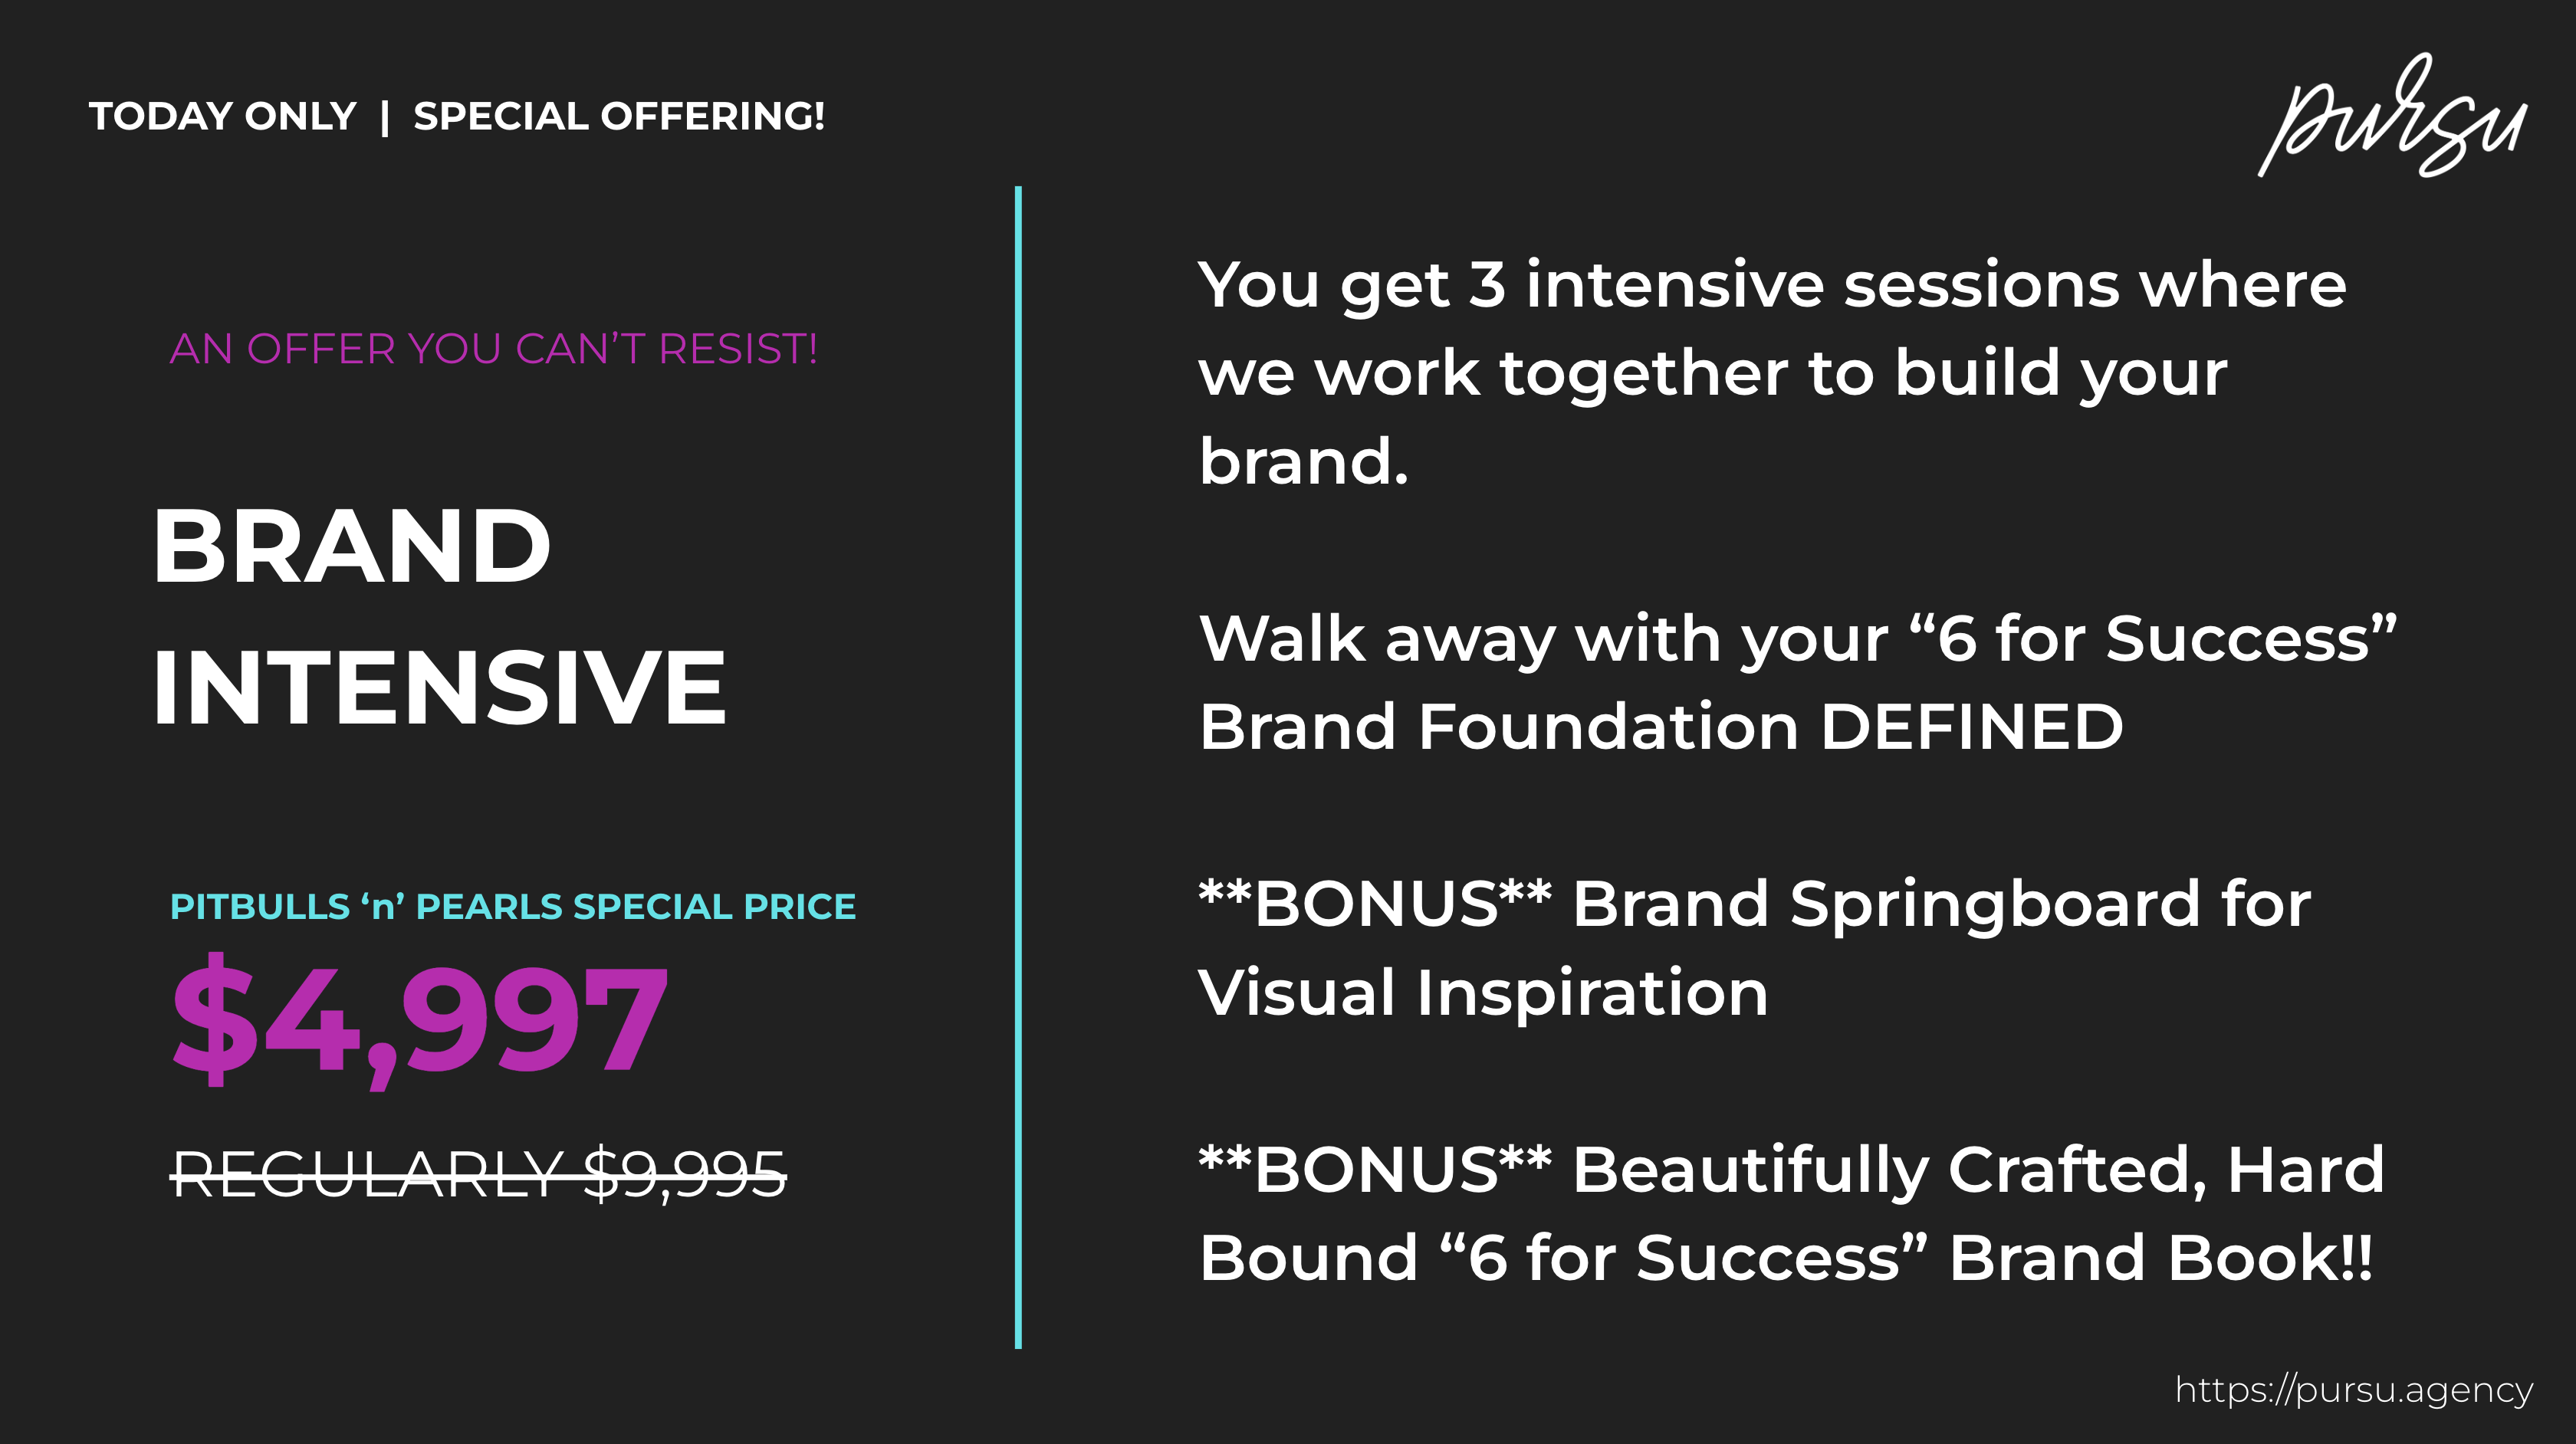 Get an in-depth brand intensive session with branding expert Betsy! Walk away with your 6-for-Success brand strategy DEFINED and receive a beautiful brand book you can use to guide and grow your business.